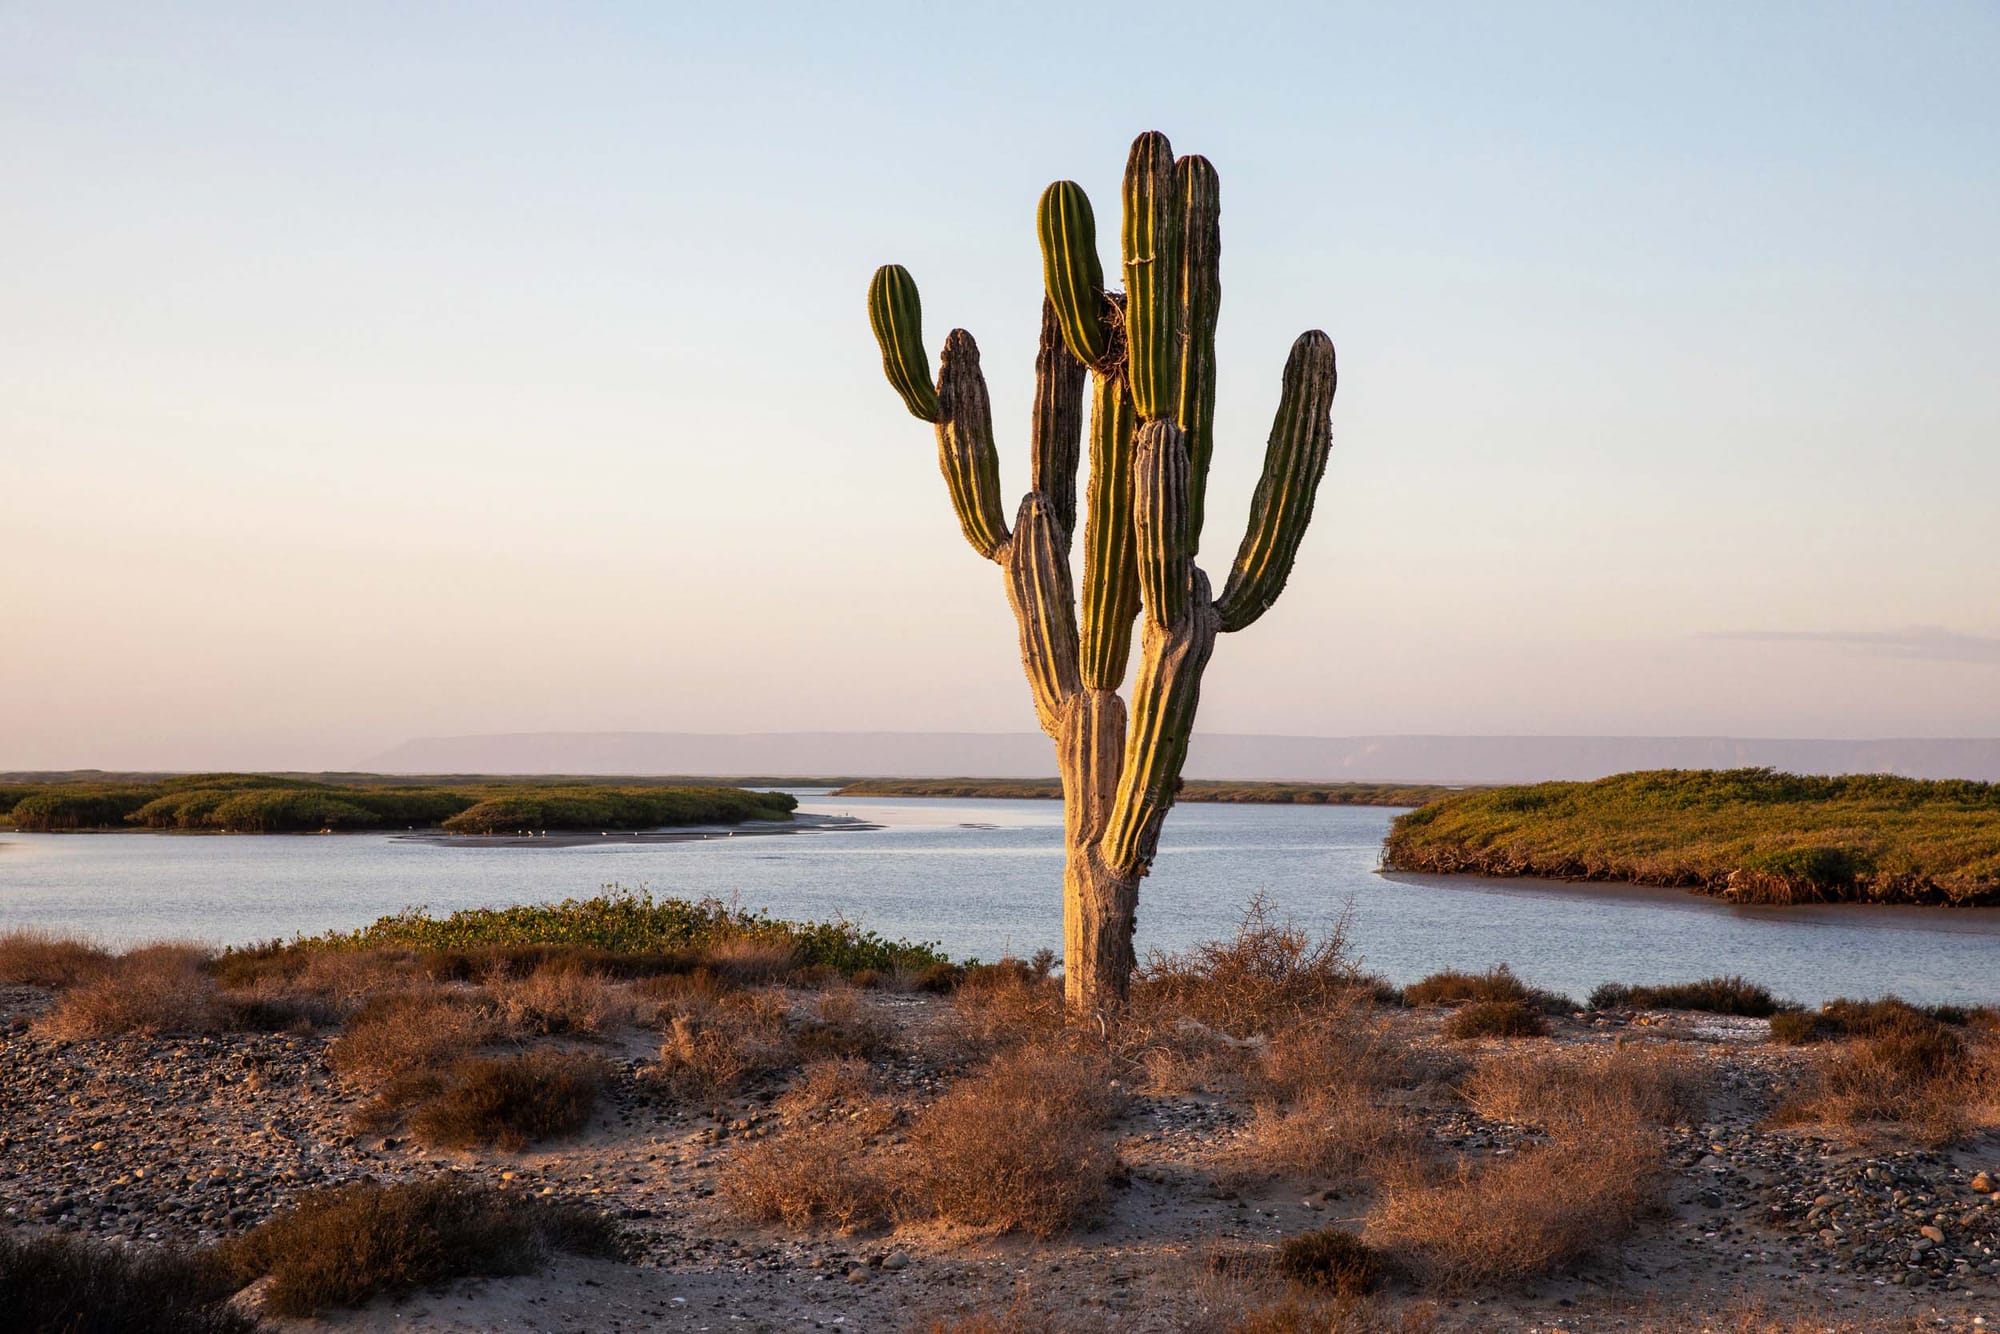 A classic tall cactus with lots of arms surrounded by flat land and water